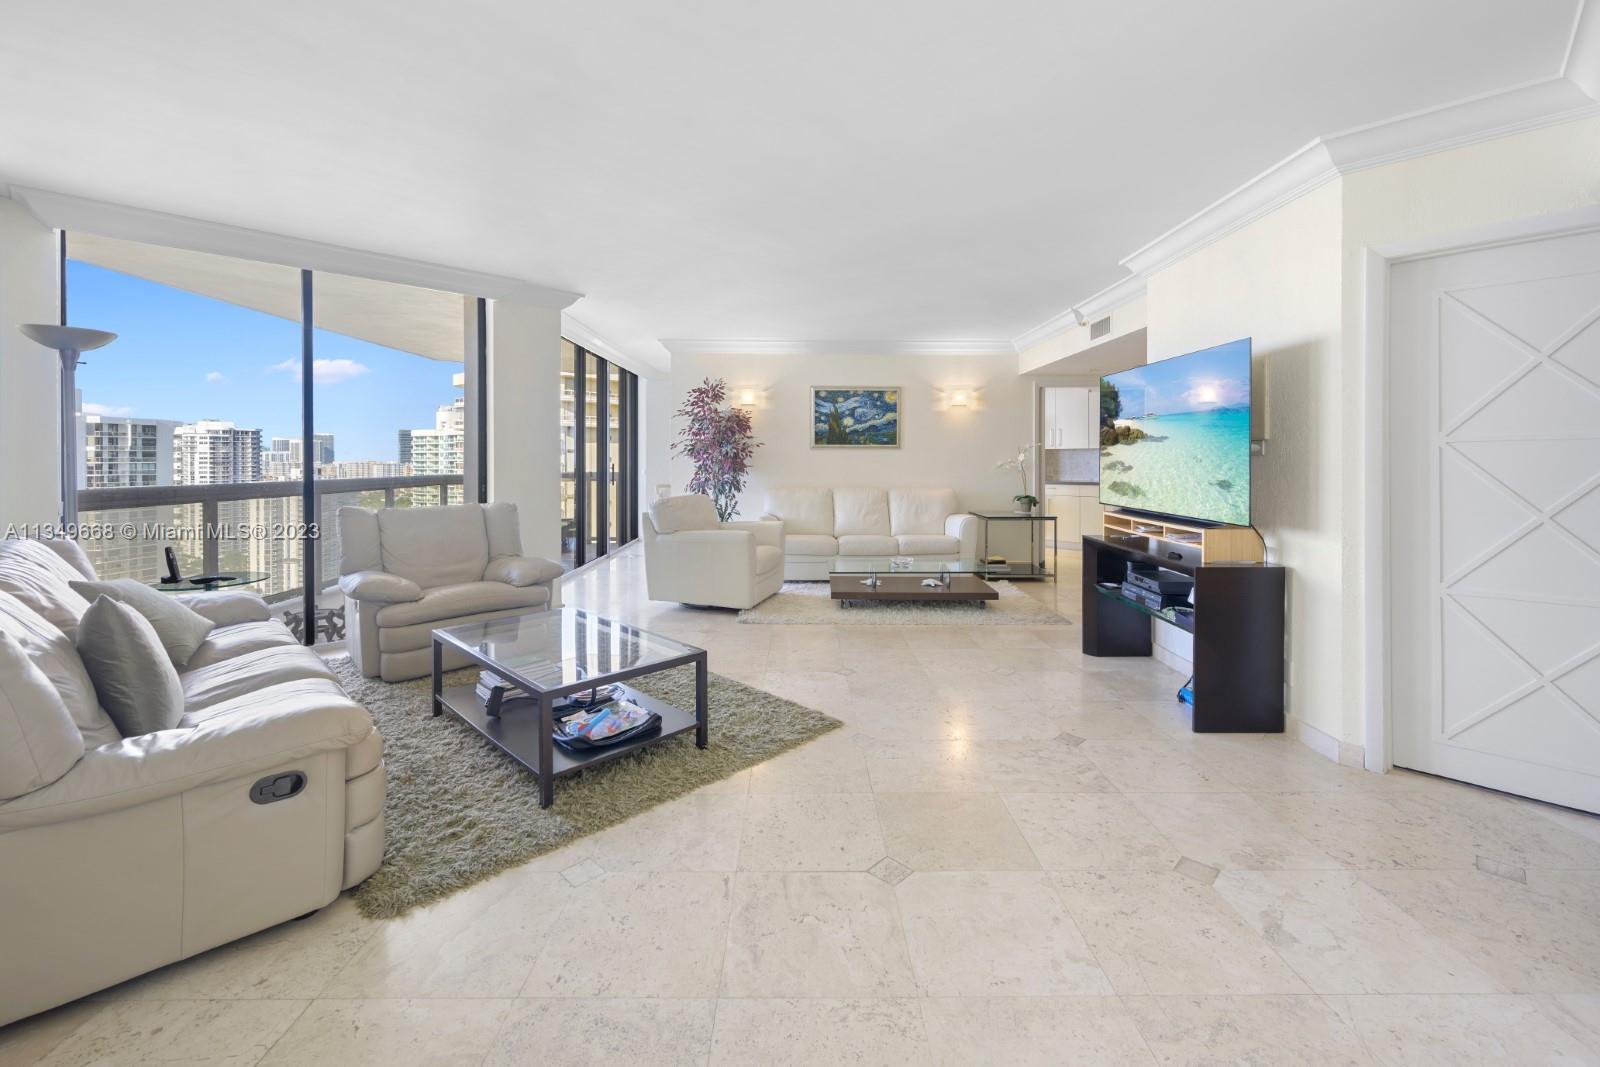 Beautiful 3Bed 2.5 Bath in the iconic Landmark building in Aventura. Located on the 26th floor with 